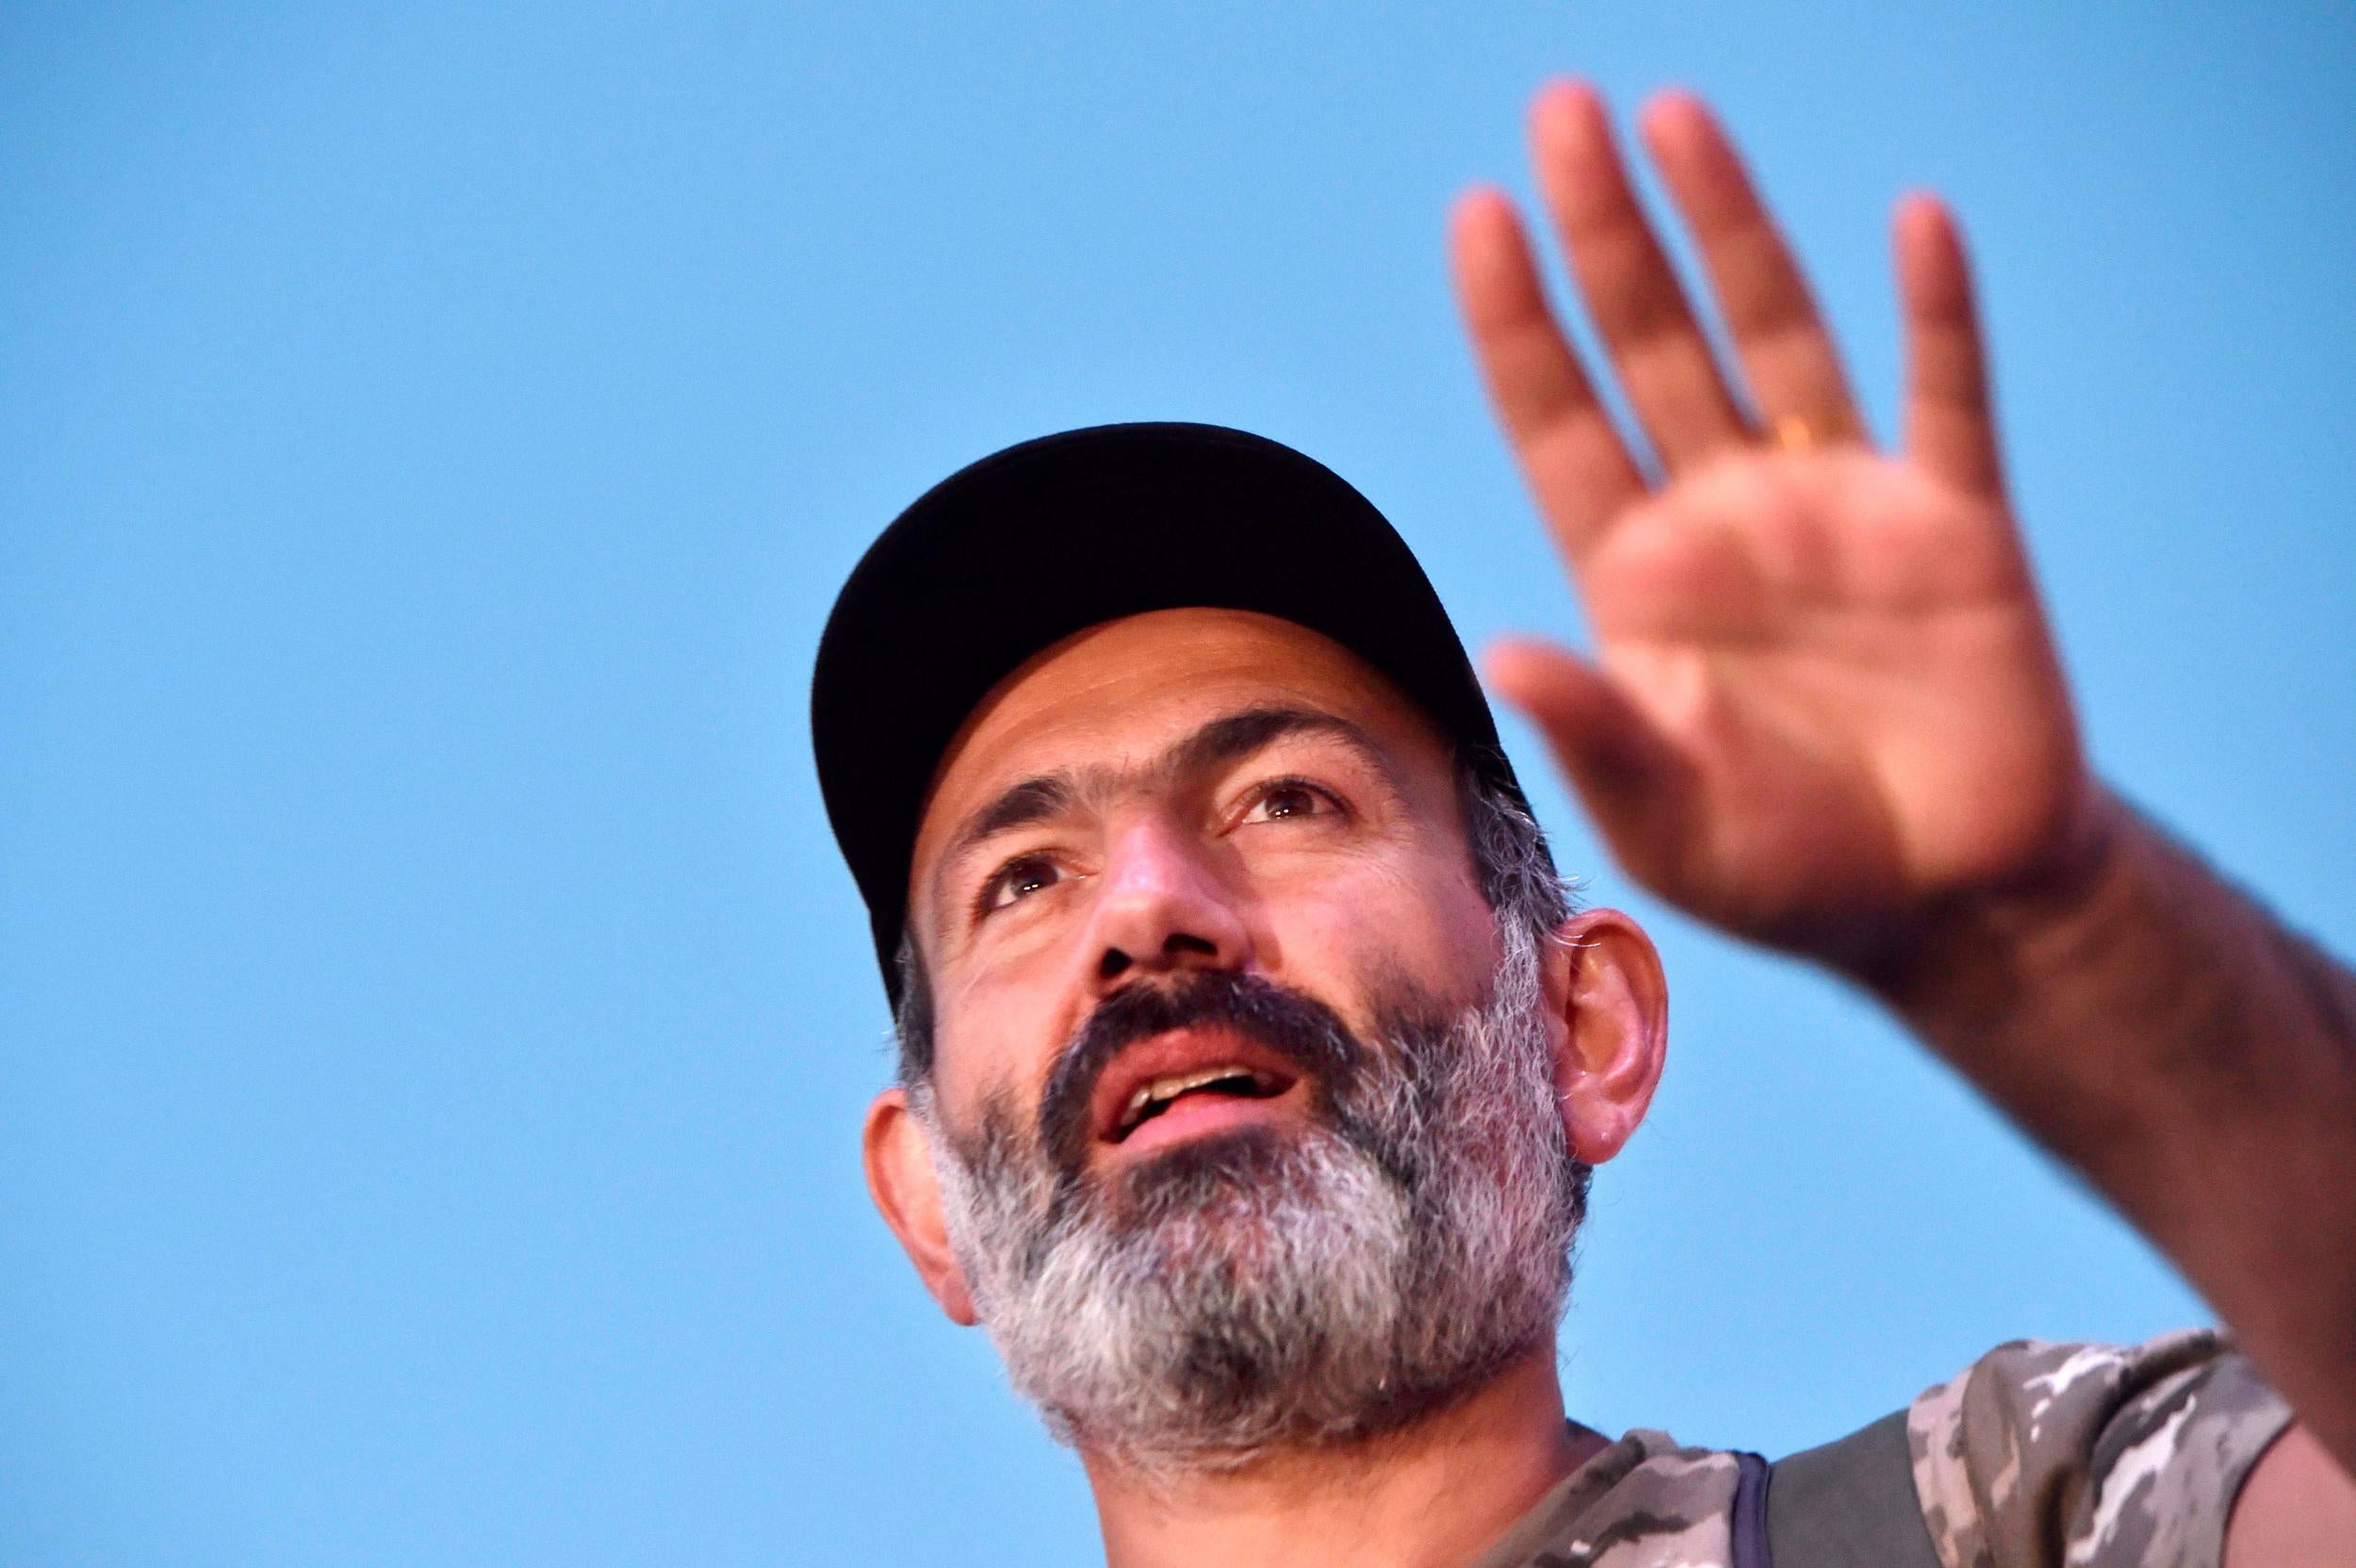 Armenian opposition leader Nikol Pashinyan attends a rally in Yerevan on 2 May